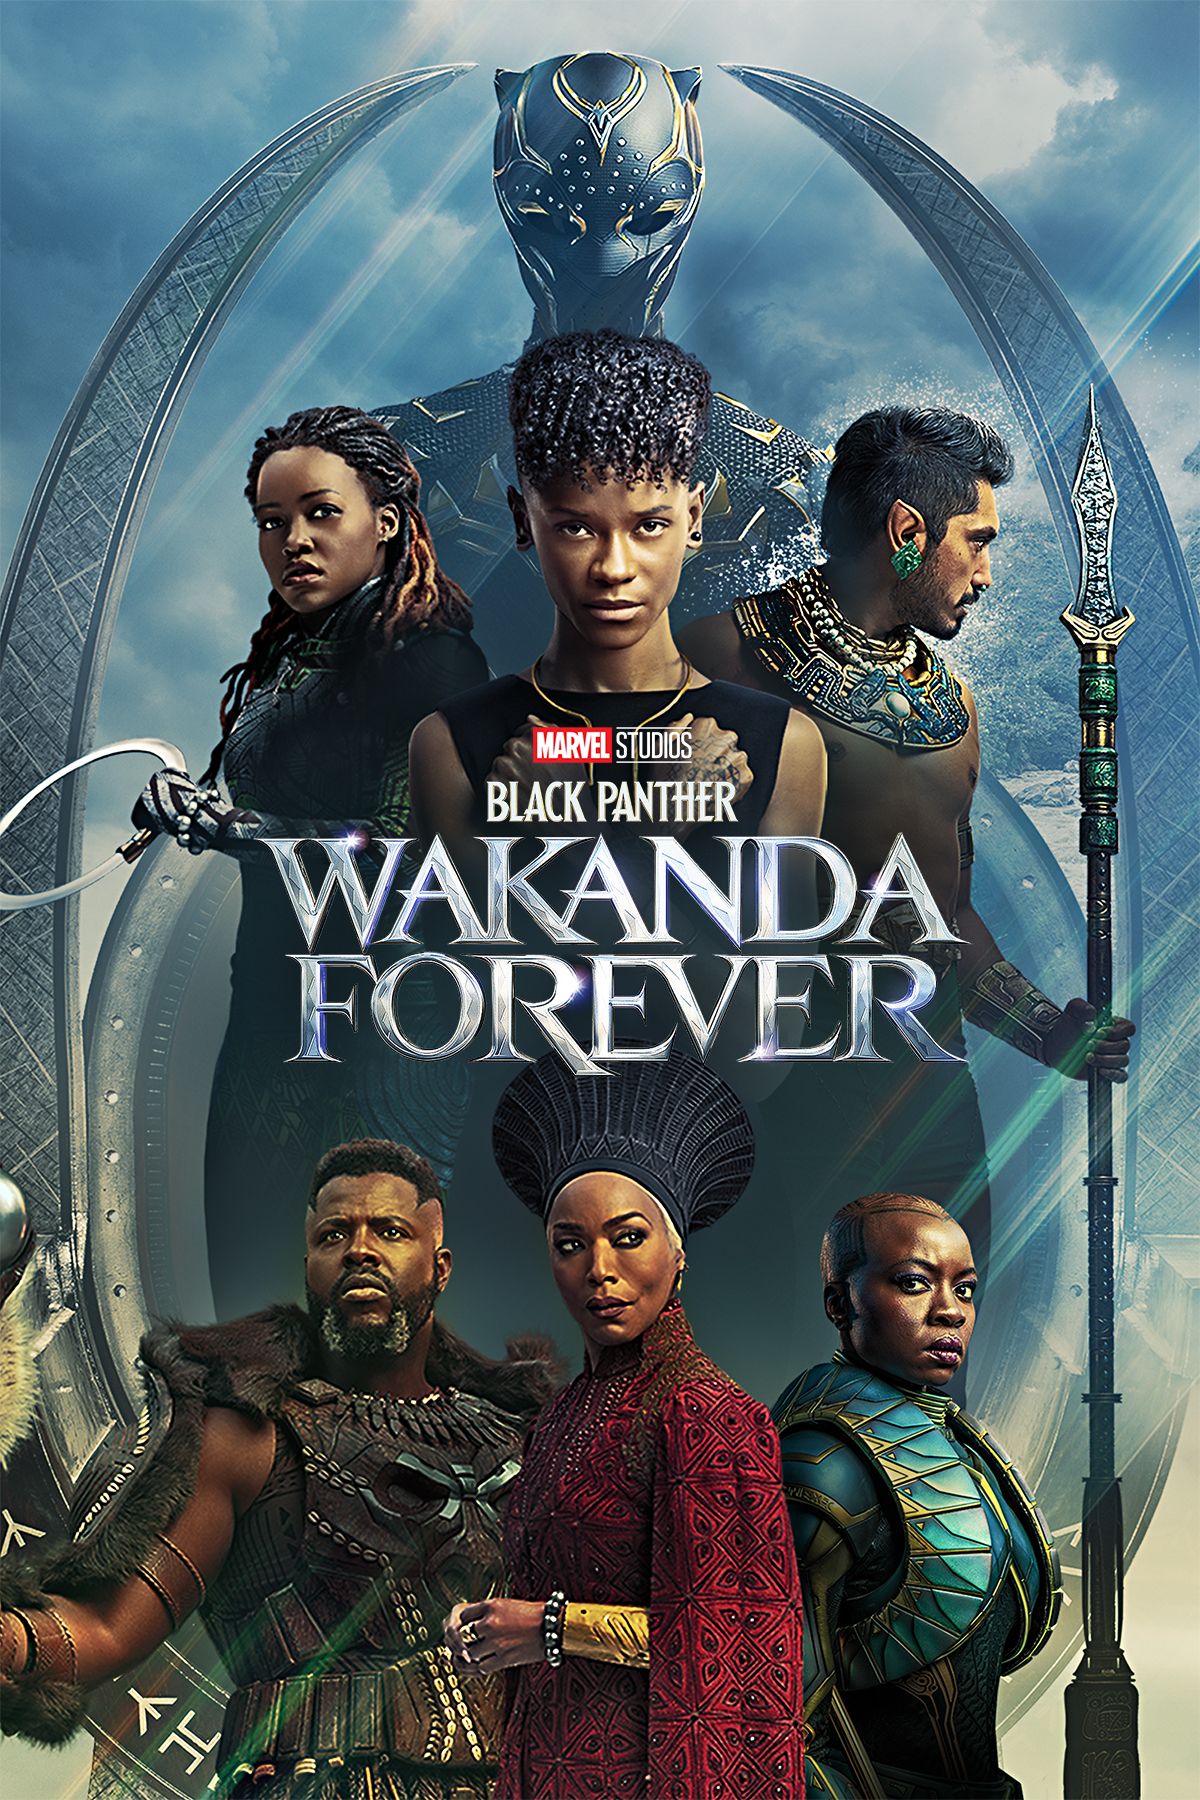 Wakanda Forever Black Panther Steel Poster — Art of Steel